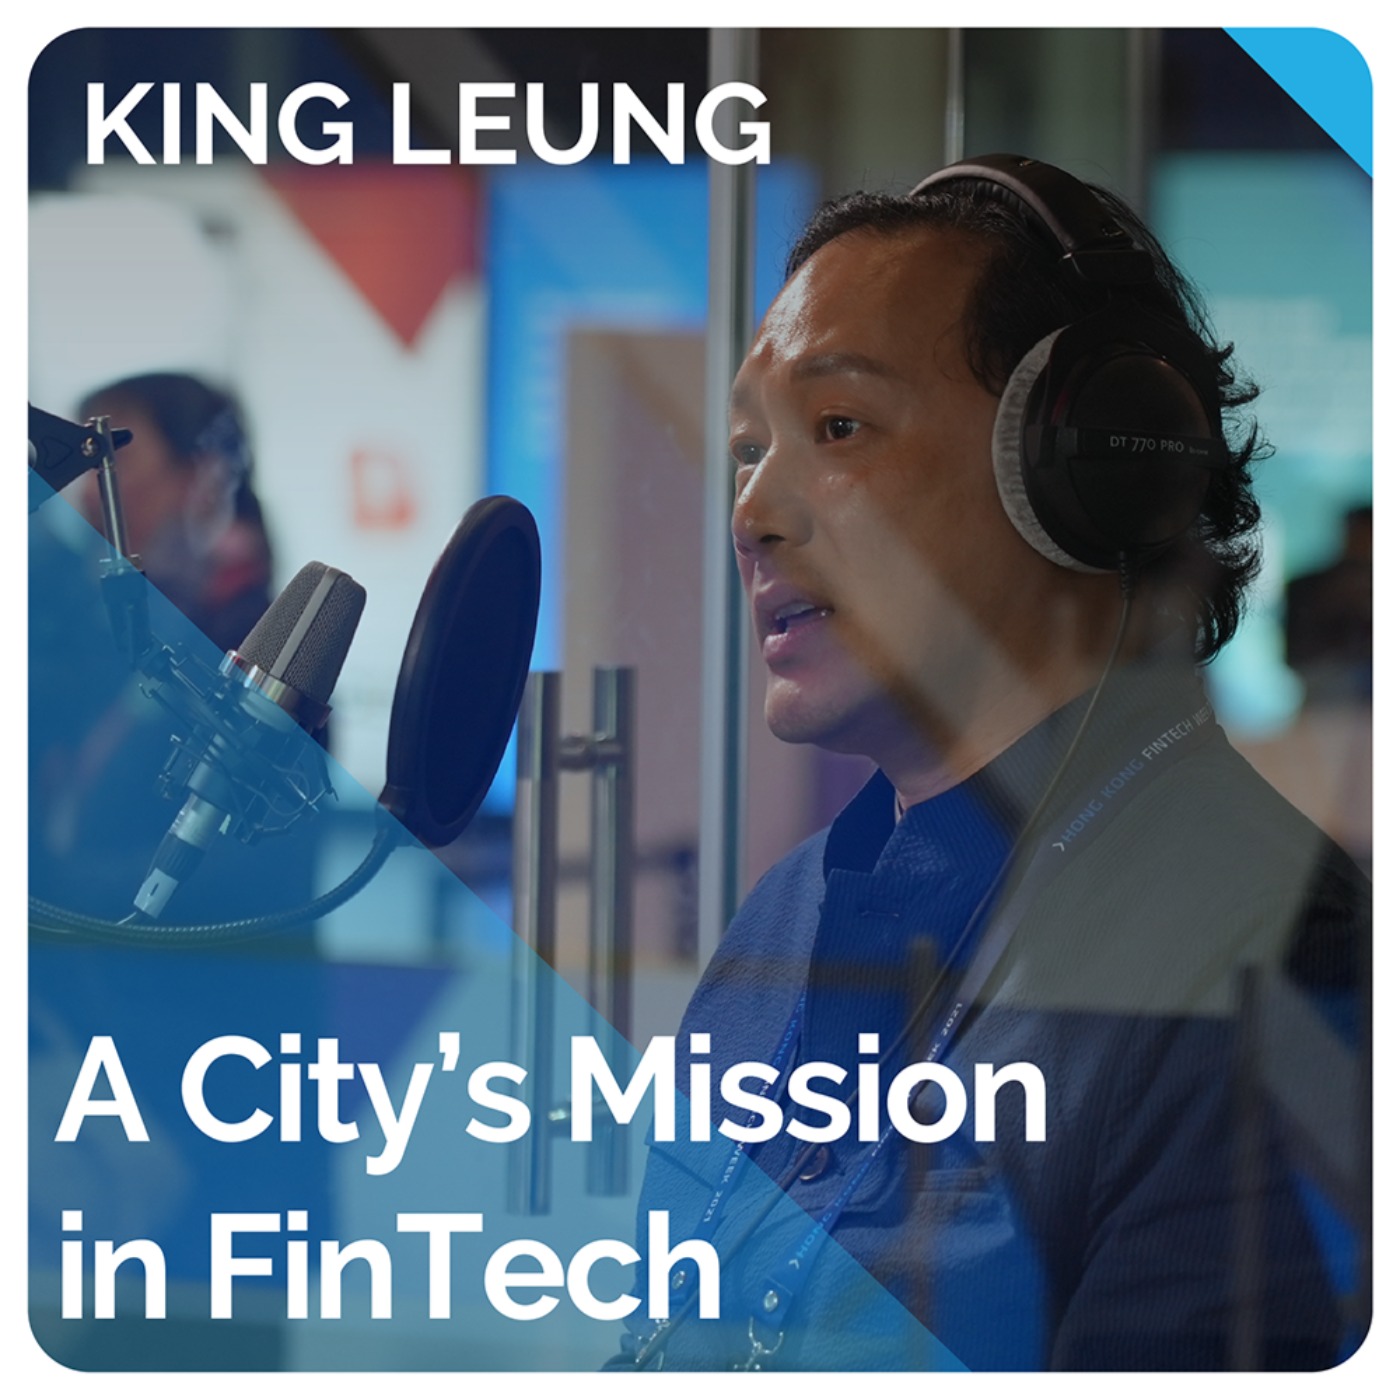 A City’s Mission in FinTech (ft. King Leung)